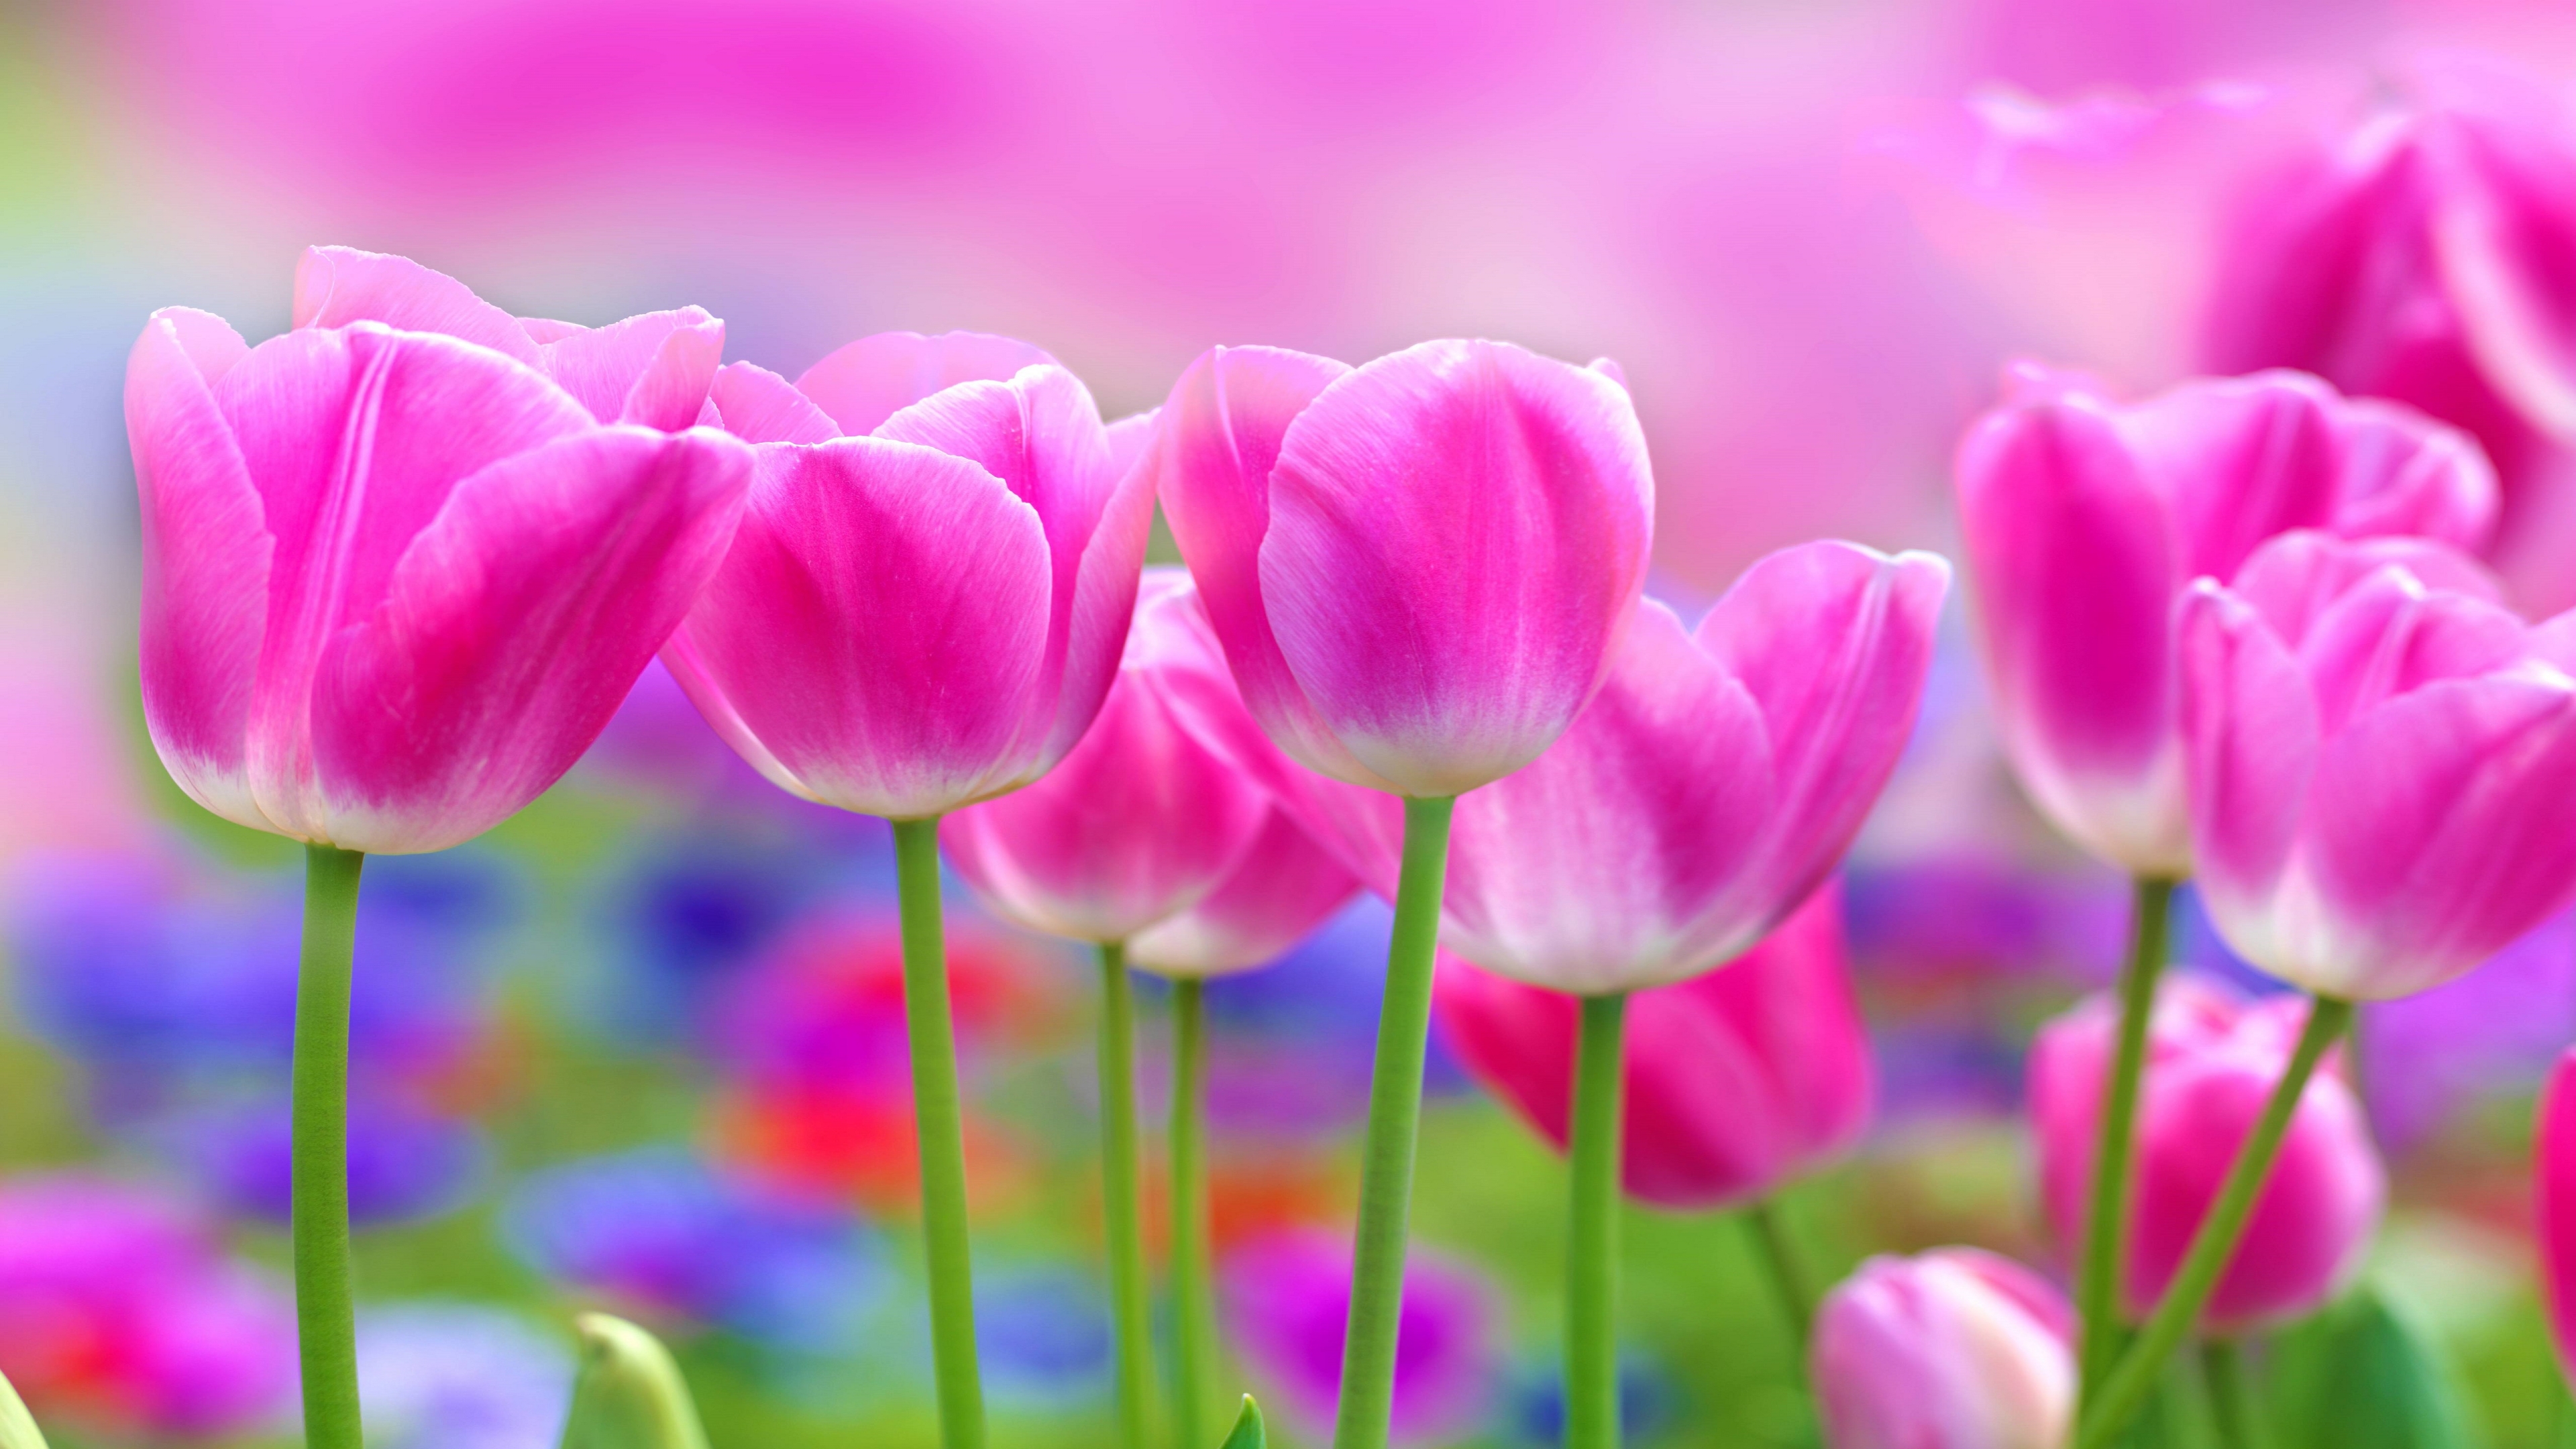 Pink Tulips for 3840 x 2160 4K Ultra HDTV resolution